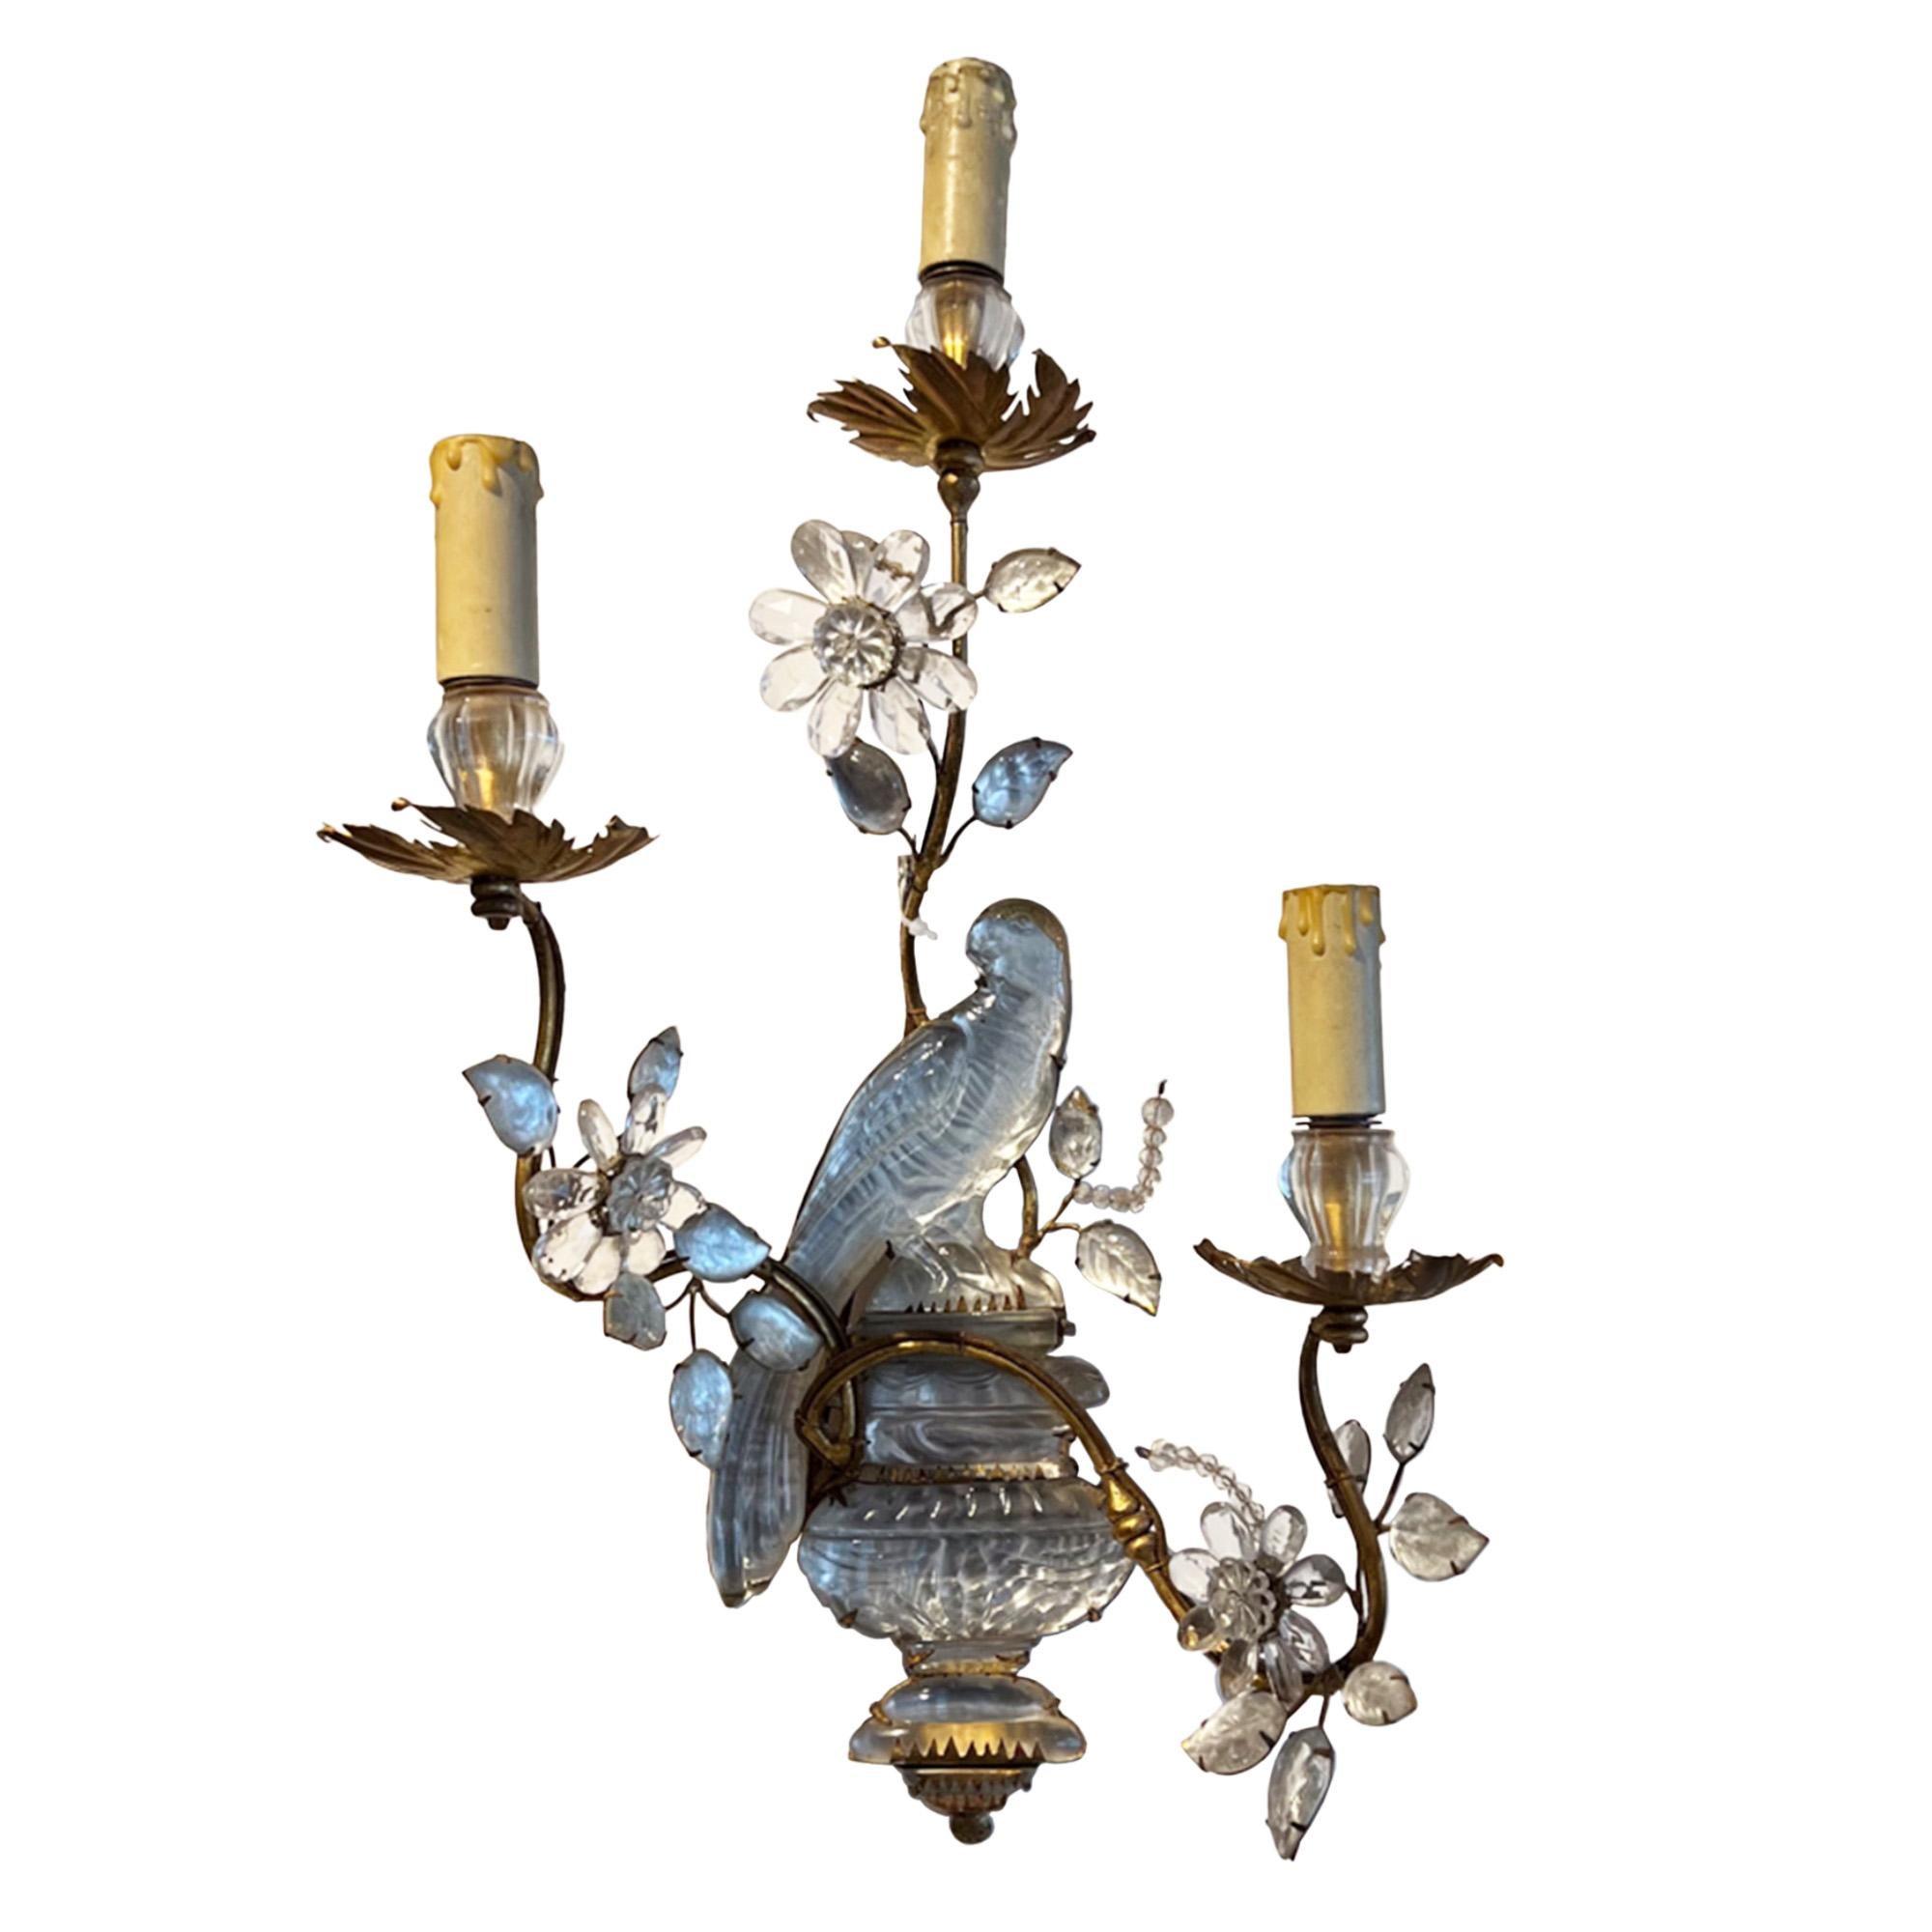 This is a stunning pair of large Maison Baguès wall sconces with their iconic parrot and urn design. This set have 3 torches per light, we also have pairs with 2 bulb holders. Please get in touch if you'd like more information.

Take a look at all